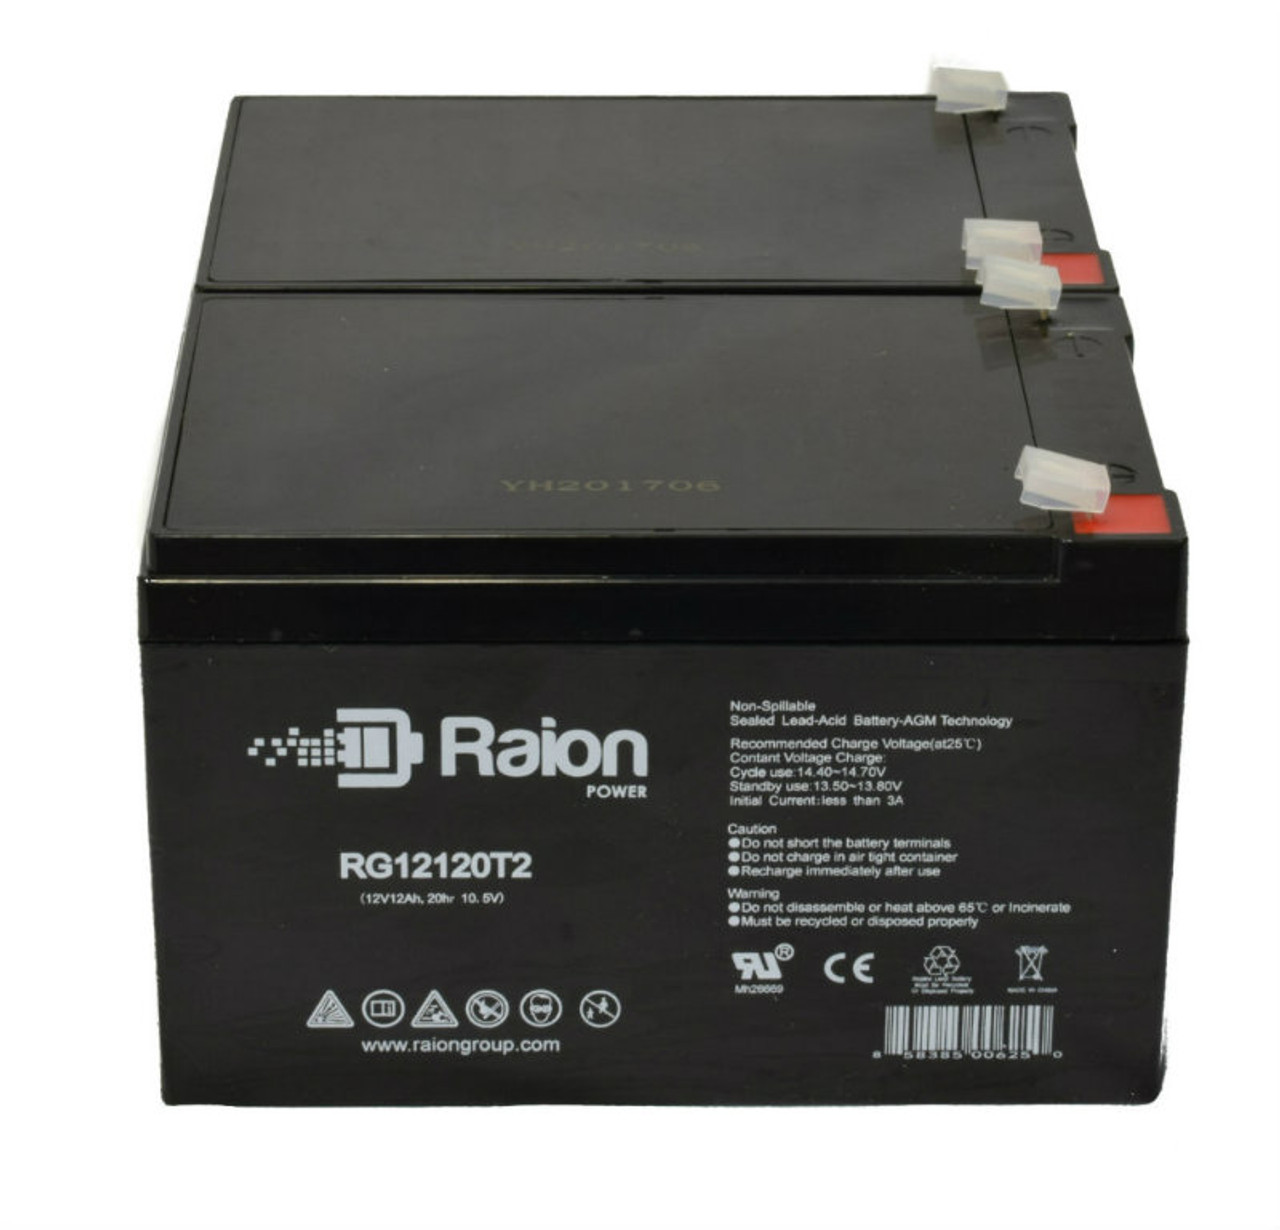 Raion Power 12V 12Ah Non-Spillable Compatible Replacement Battery for Bosfa GB12-10 - (2 Pack)